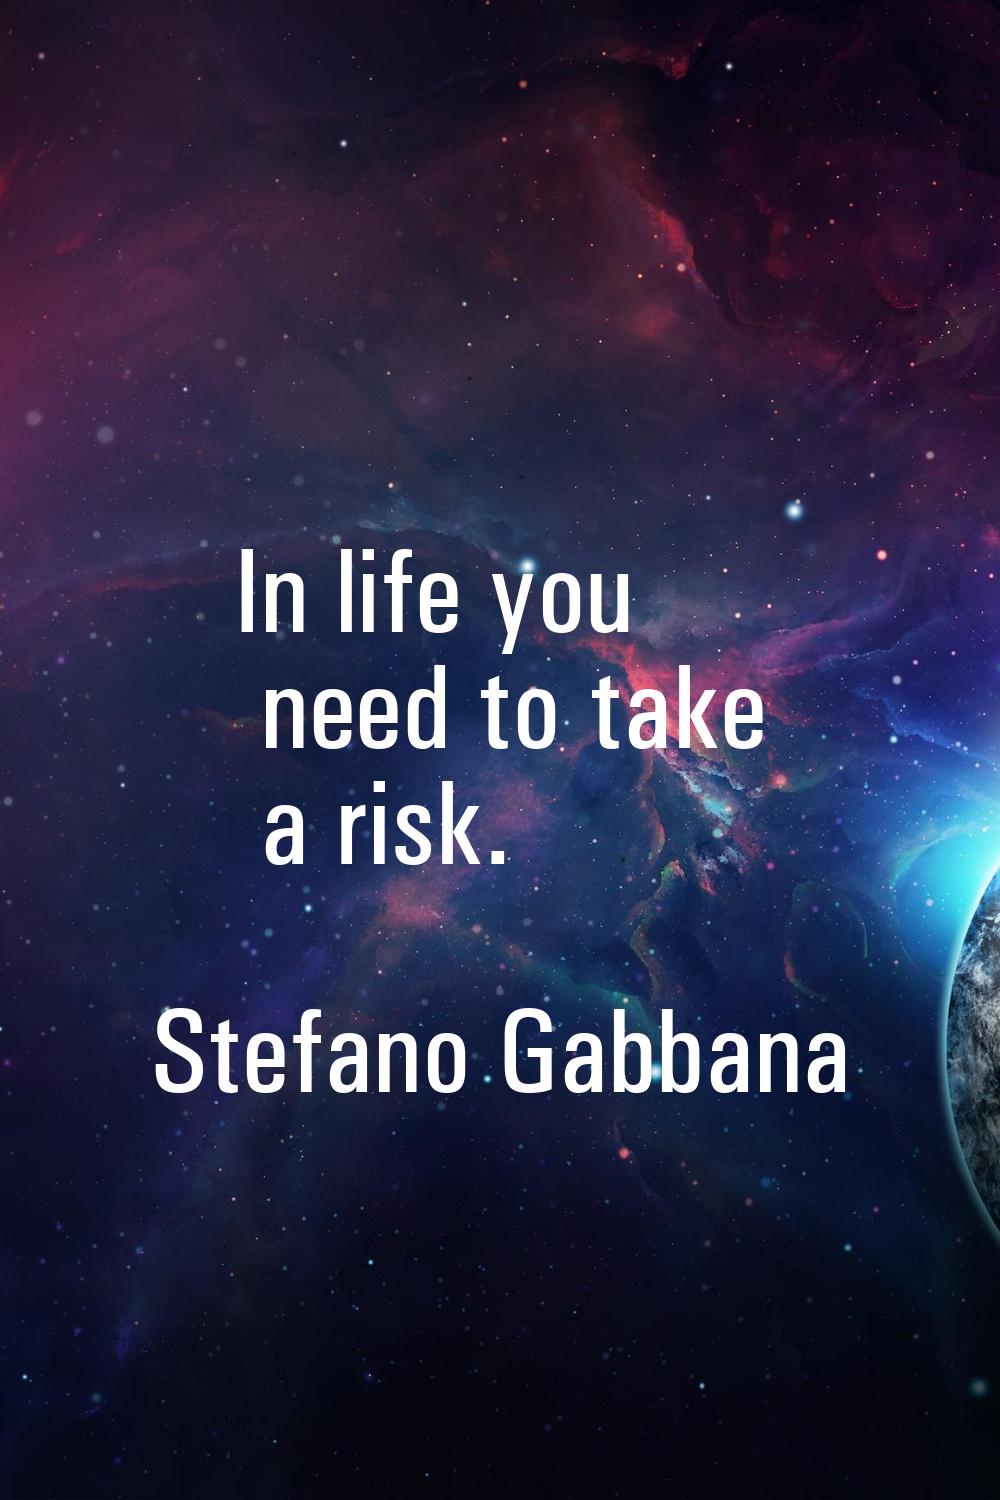 In life you need to take a risk.